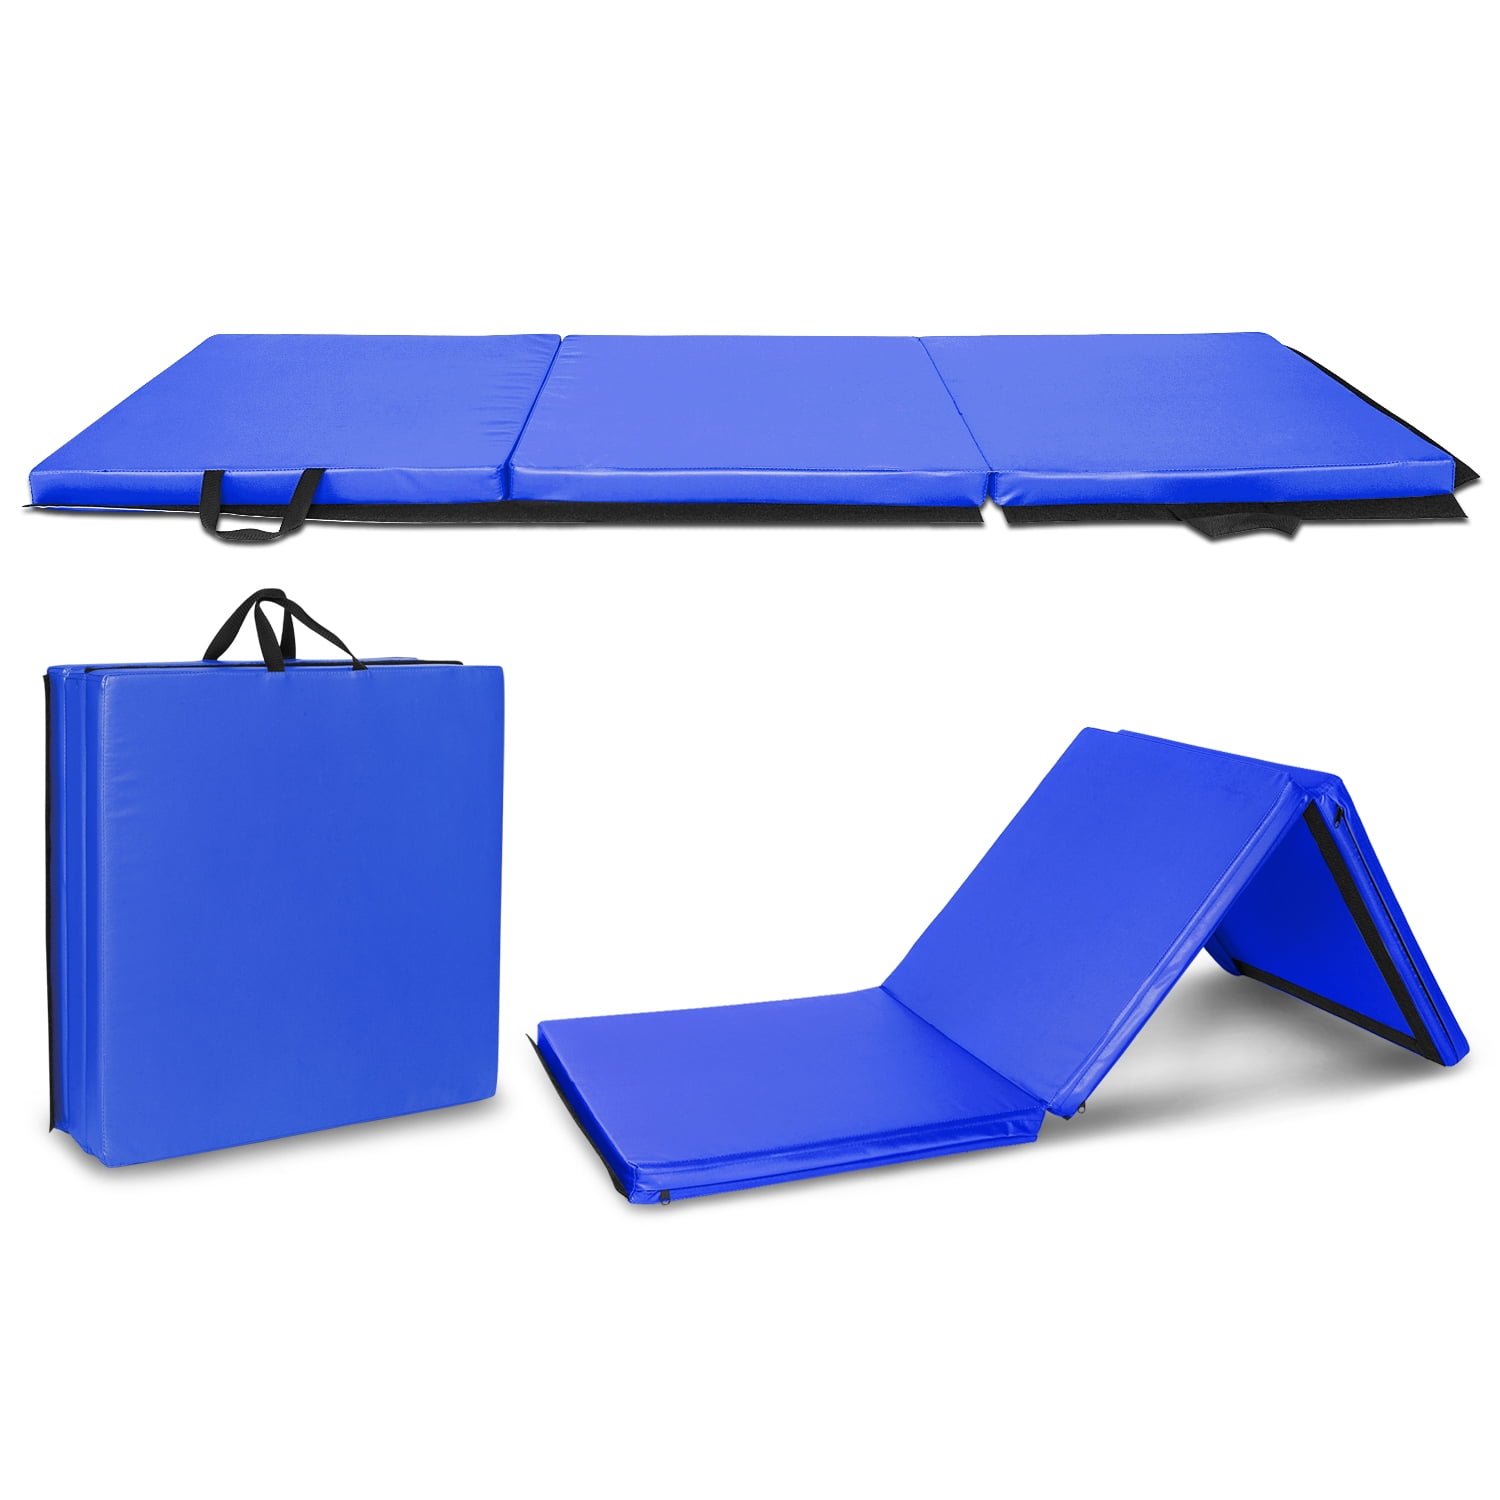 Homevibes 4 x 6 x 3 Gymnastics Mat for Home Tumbling Mat Gym Mat Thick Folding Panel Exercise Fitness Aerobics Mat for Yoga Stretching Cheerlanding with Handle Blue 